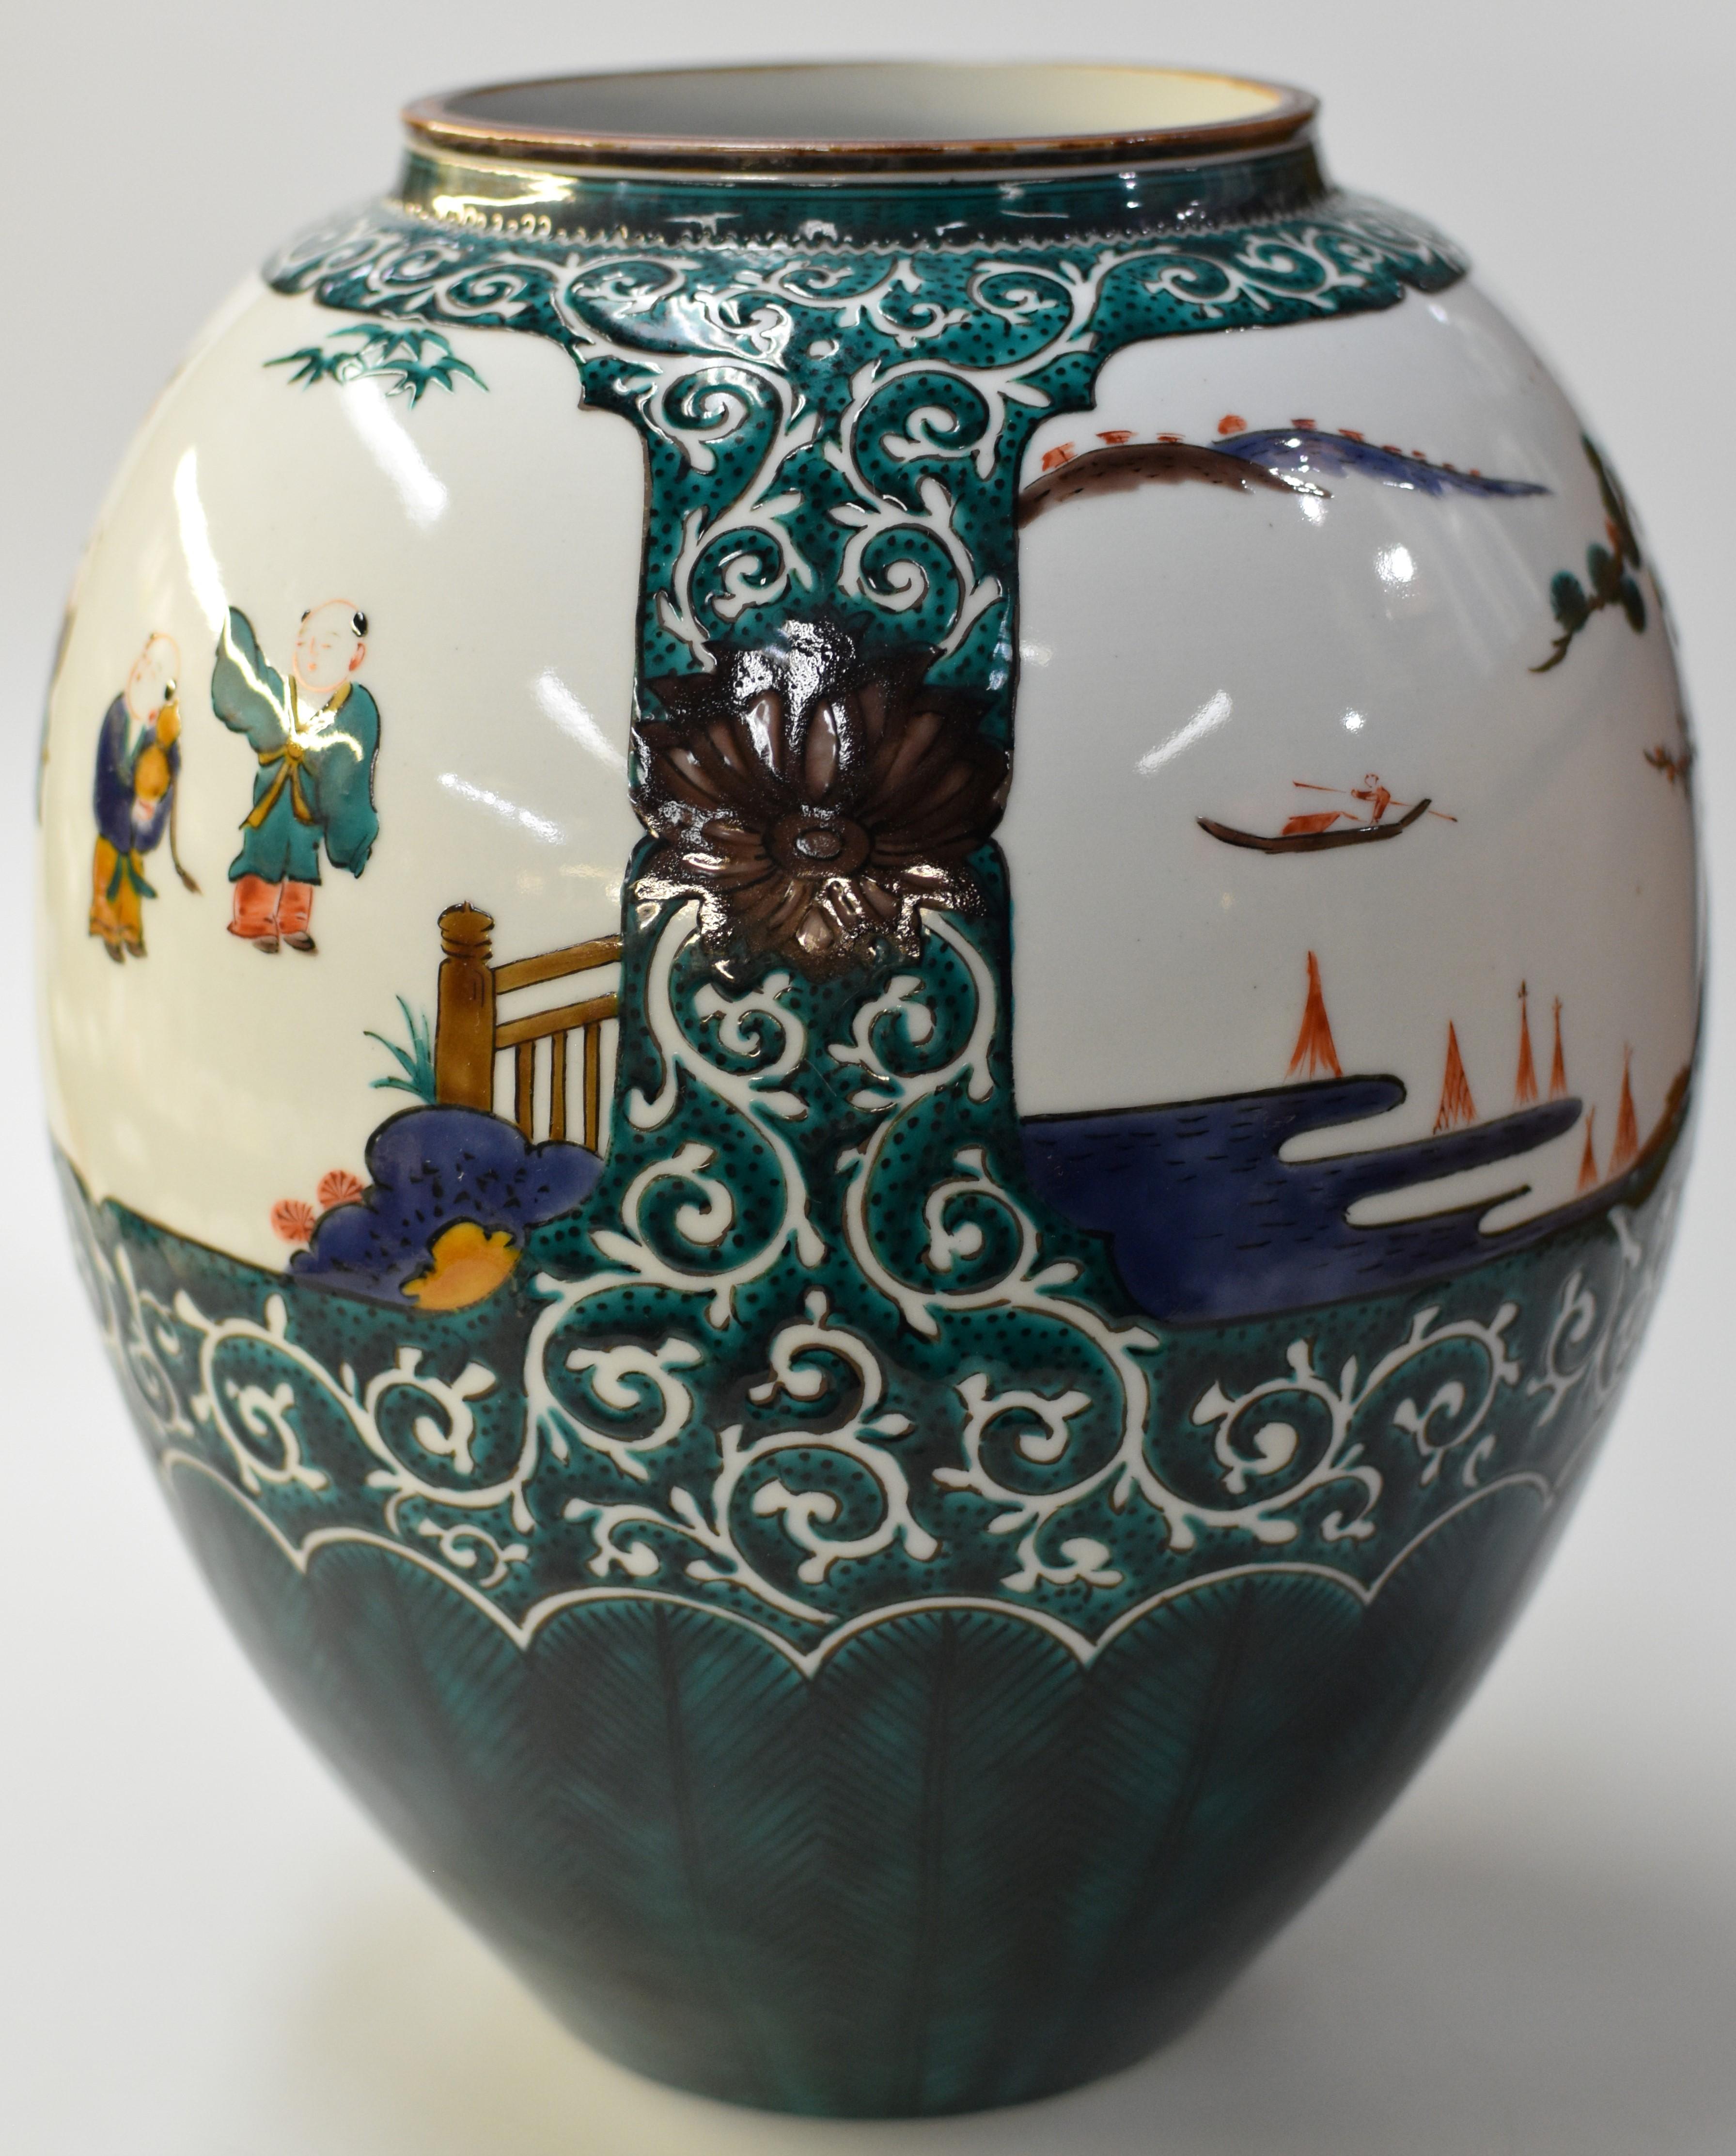 Exquisite Japanese contemporary Kutani porcelain vase, intricately hand painted on an elegantly shaped porcelain body, a signed masterpiece by the third generation master porcelain artist in traditional Kutani. His grandfather started as a porcelain